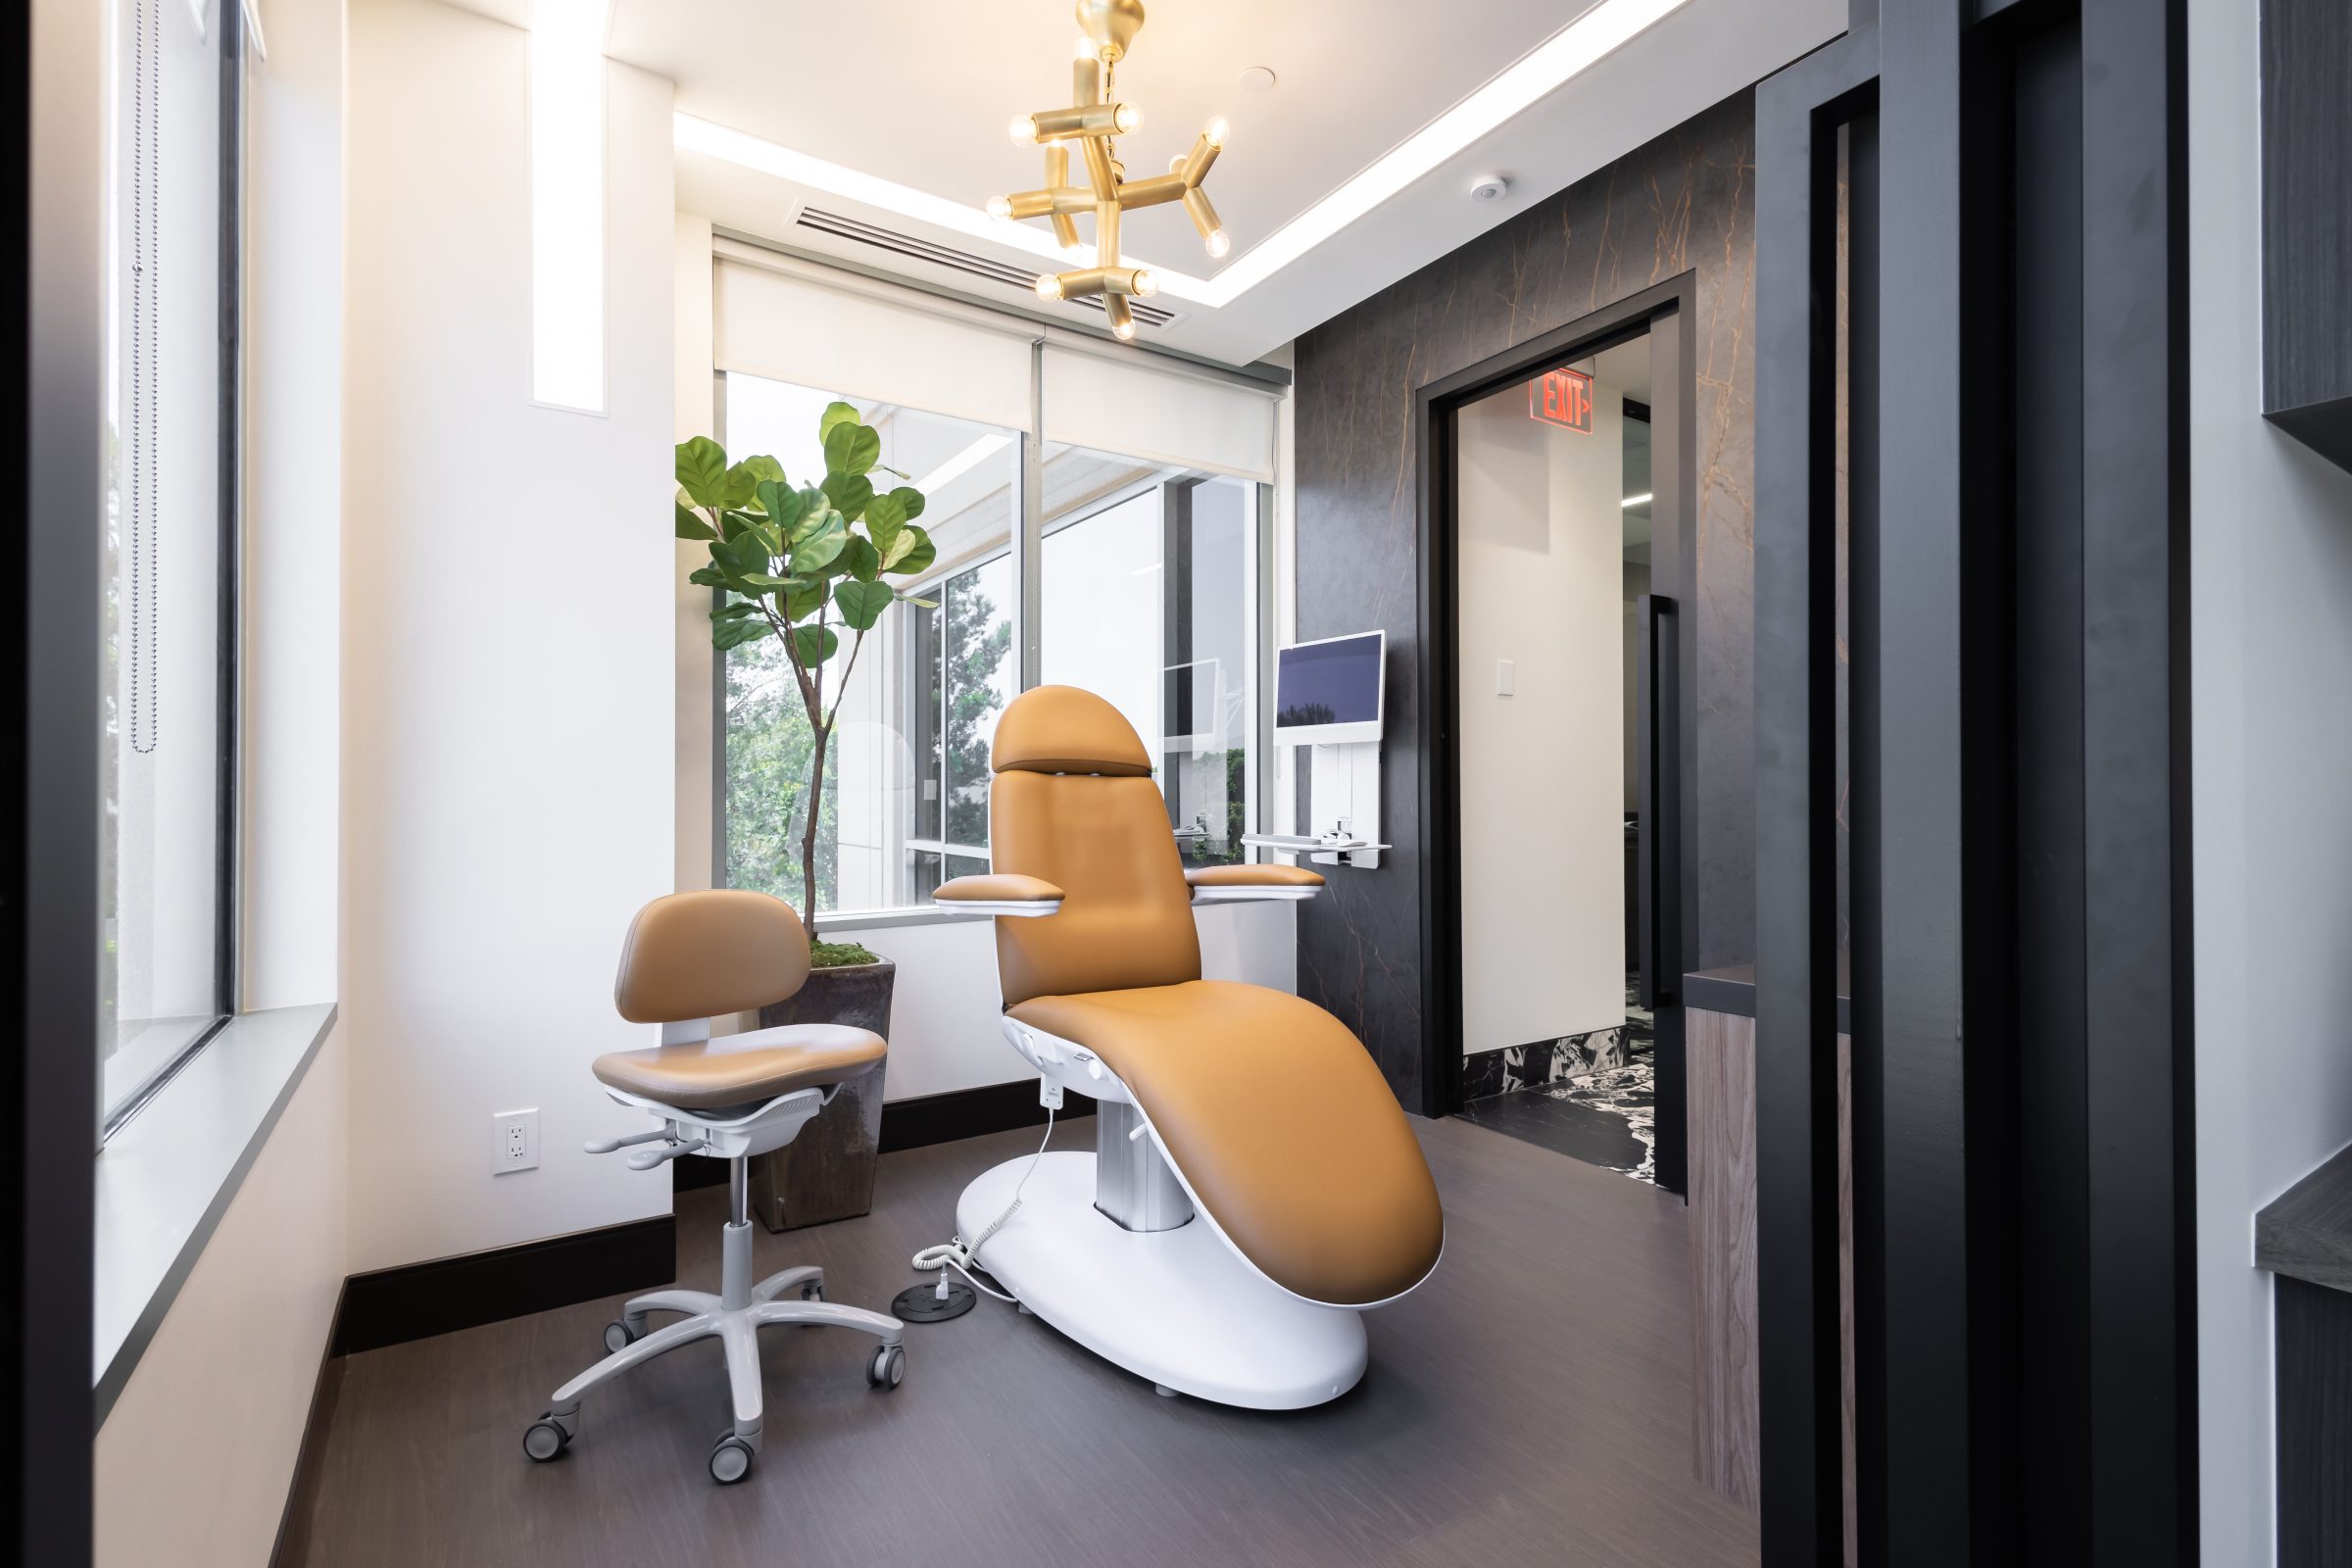 Our advanced treatment area in the Irvine dental office, equipped with cutting-edge technology to create and restore beautiful smiles.